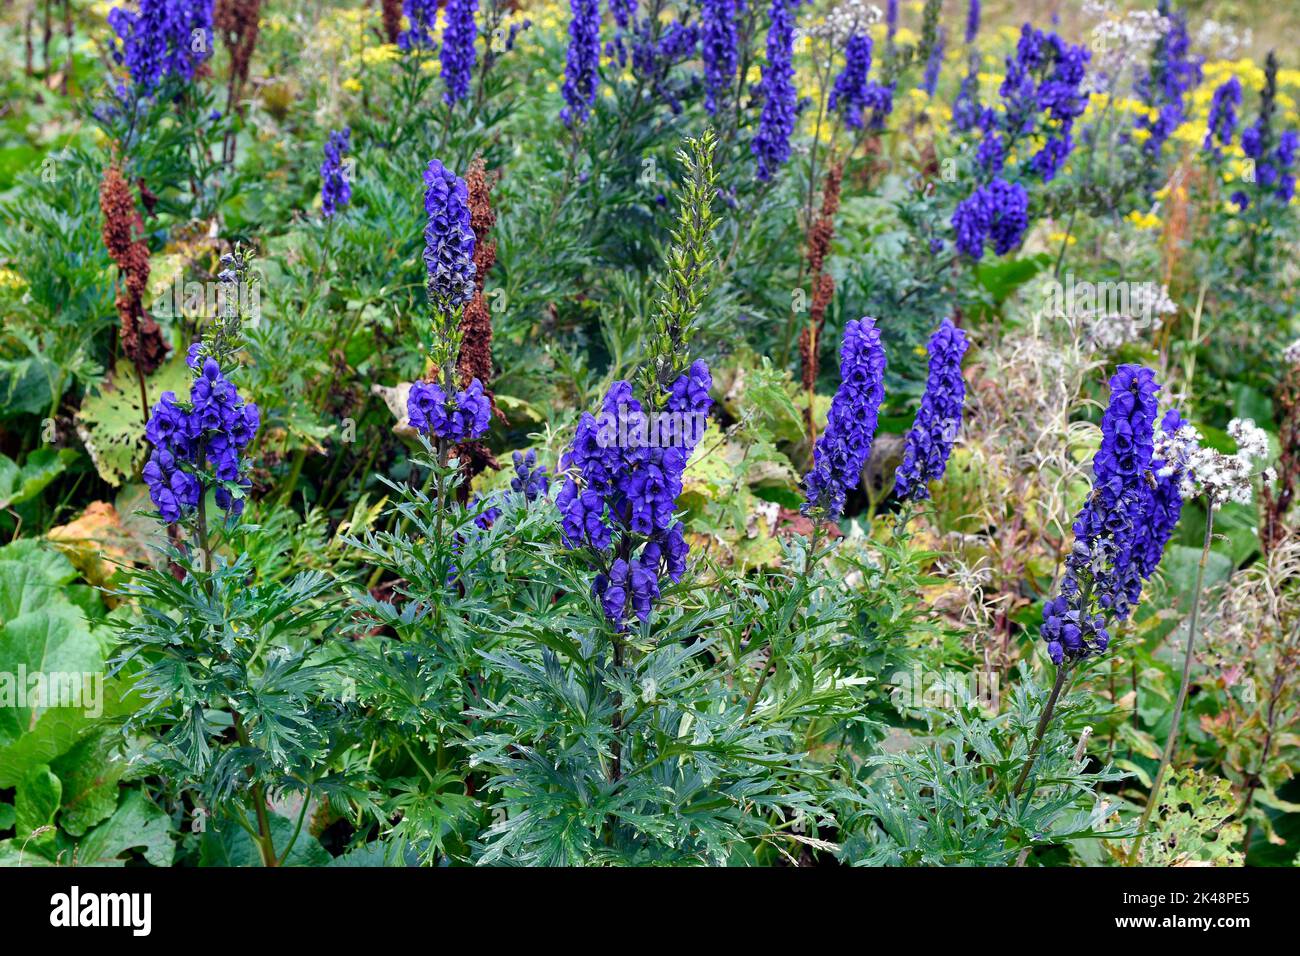 Monkshood flower - Aconitum napellus - is one of the most poisonous plants in Europe, but is also used as an ornamental plant and in medicine Stock Photo